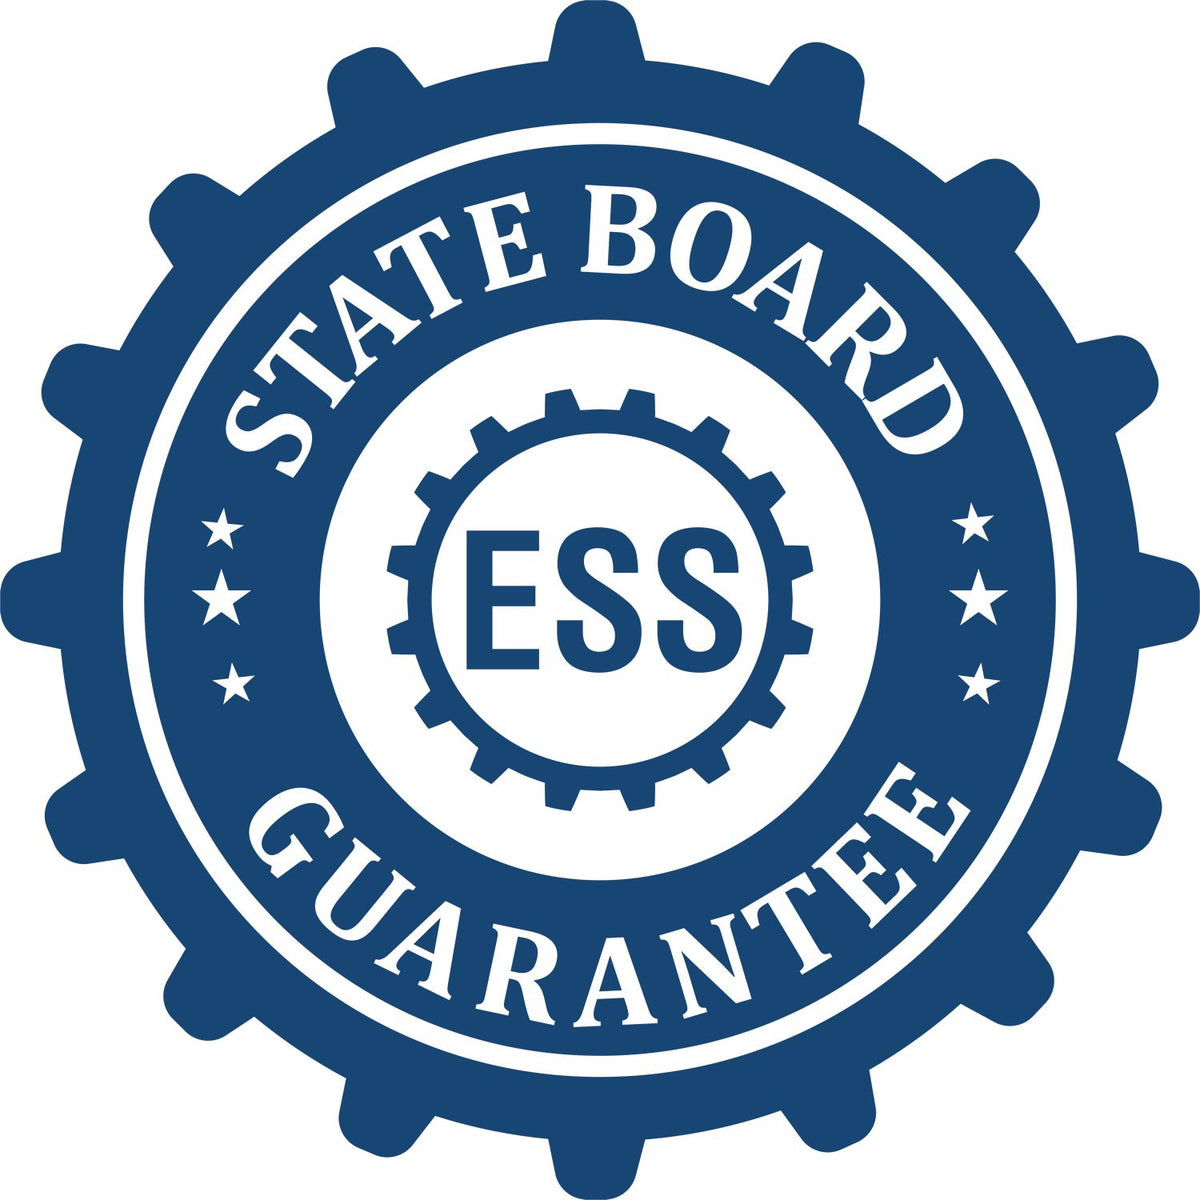 An emblem in a gear shape illustrating a state board guarantee for the Georgia Geologist Desk Seal